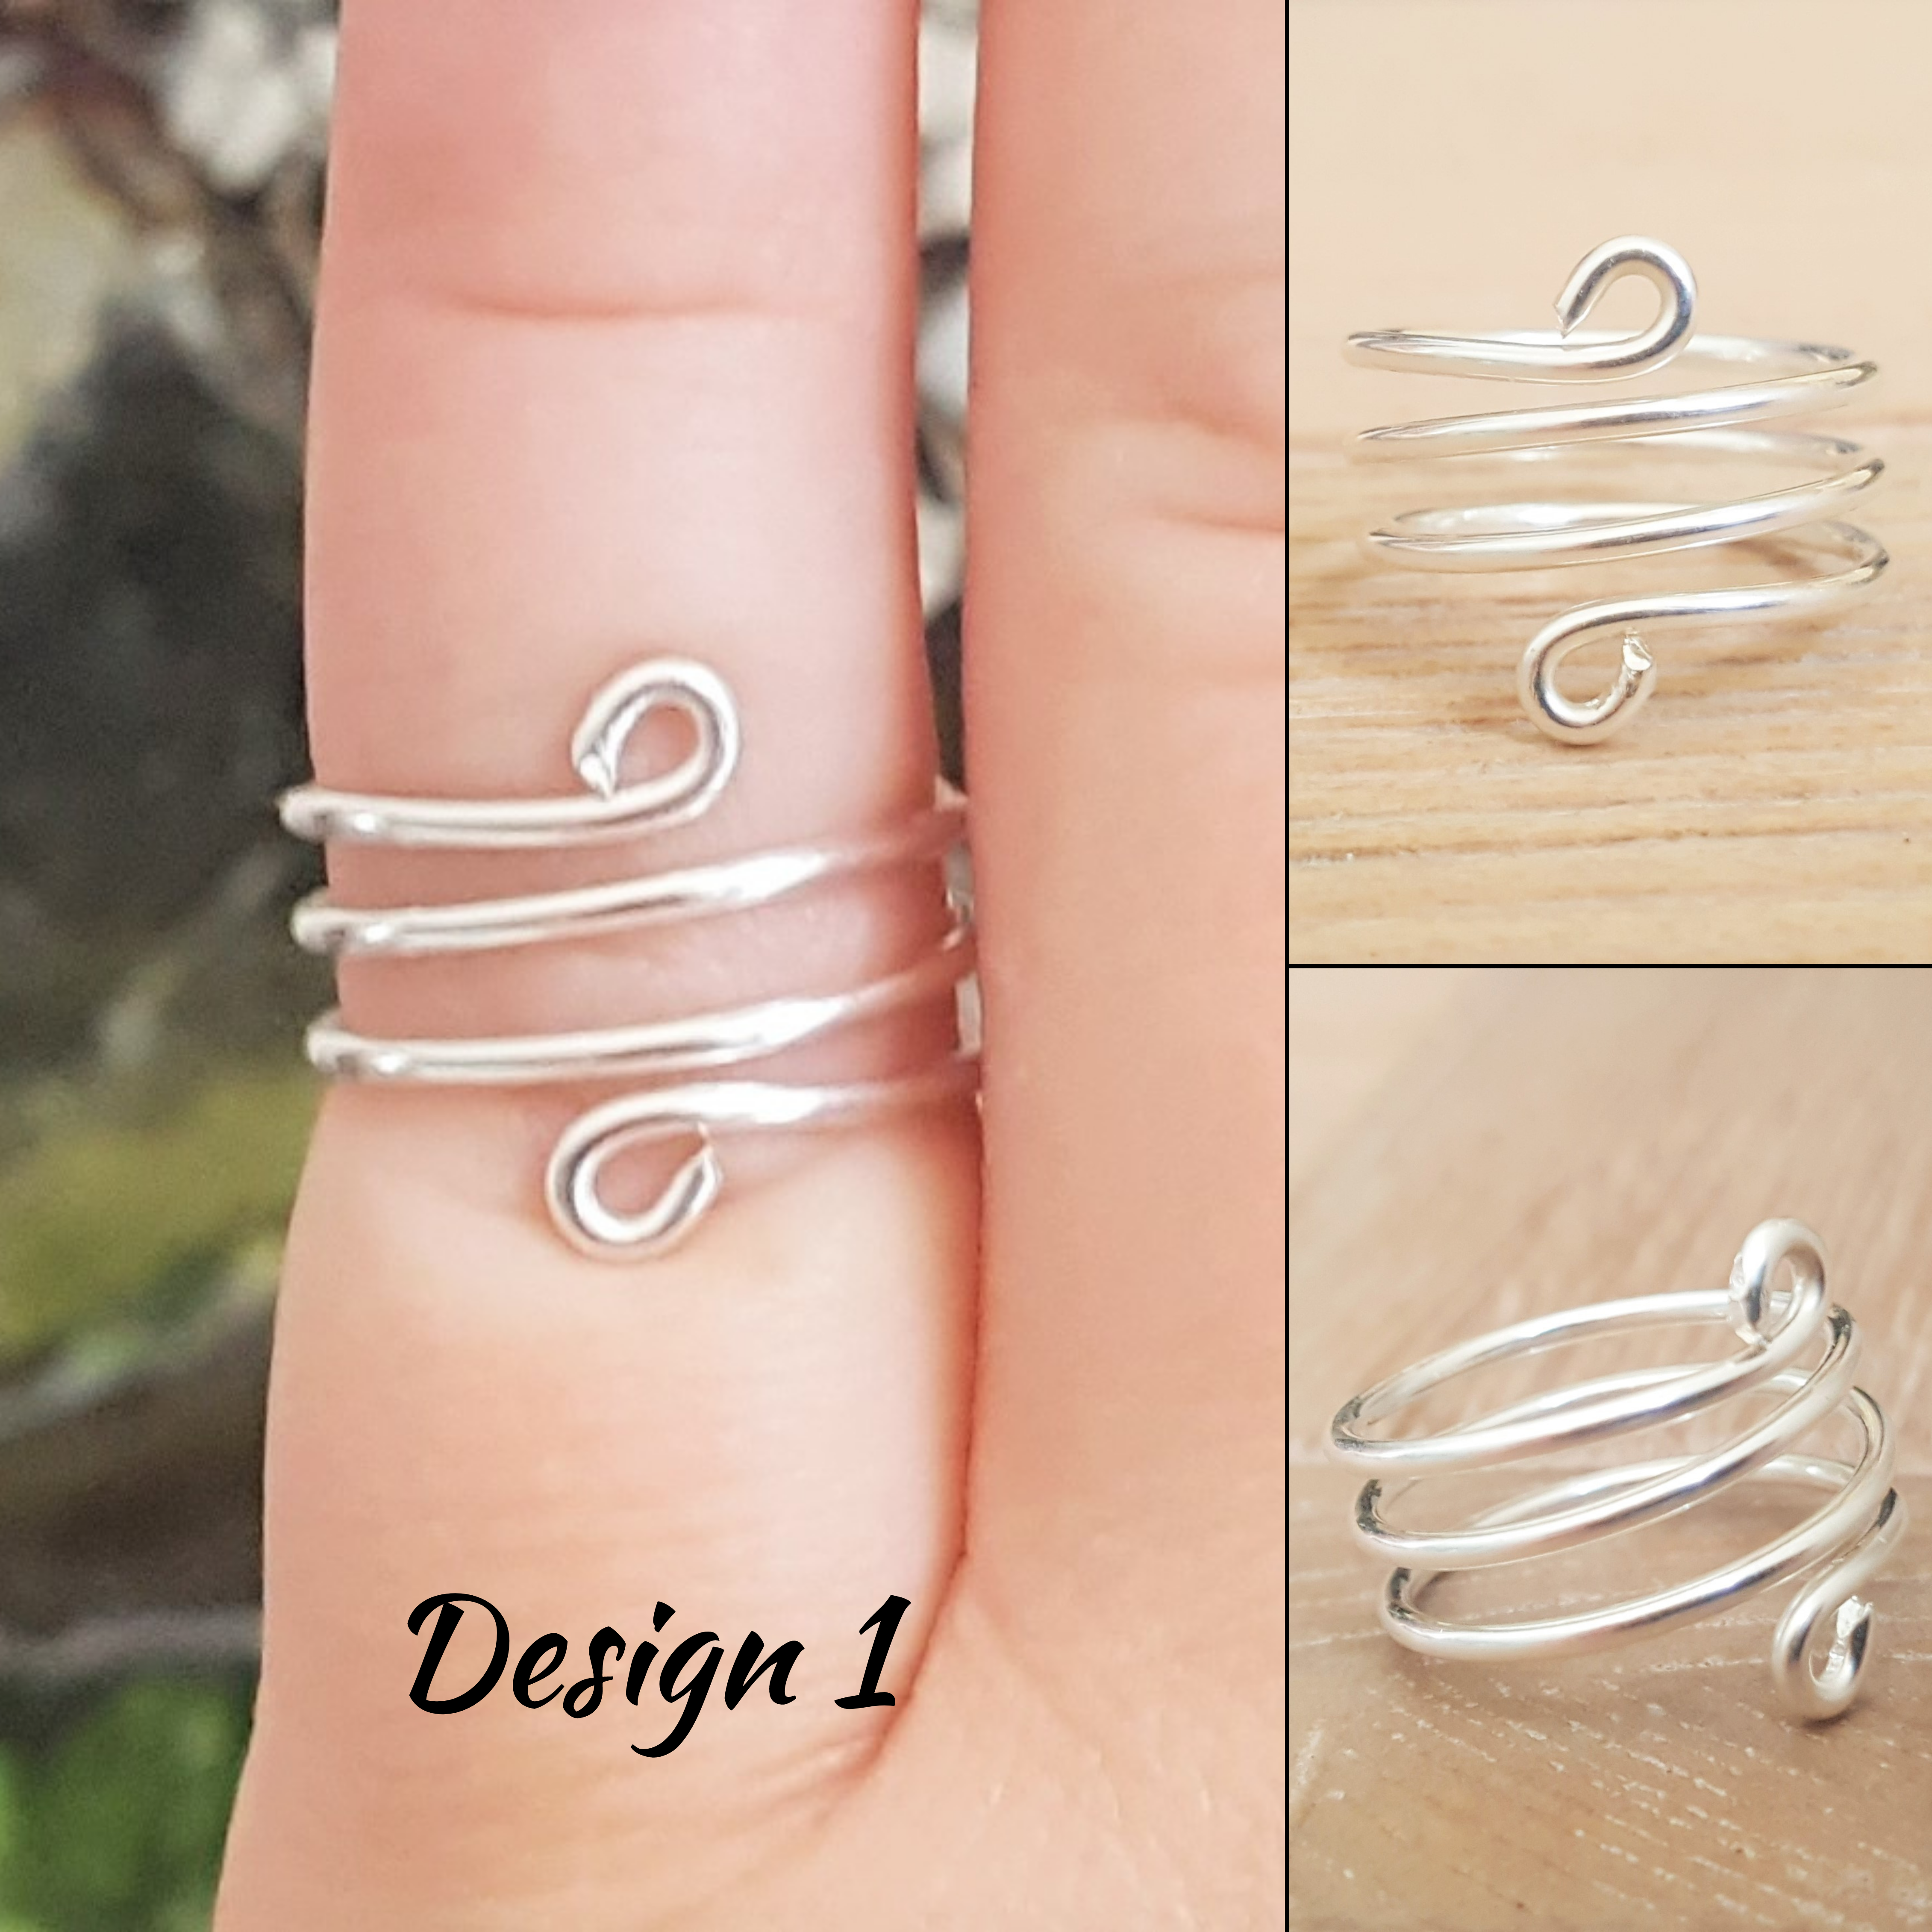 Buy Thumb Ring, Thumb Rings, Sterling Silver Thumb Ring, Coil, Bypass,  Adjustable, Polished 925, Thumb Rings for Women thumbring Silver Rings  Online in India - Etsy